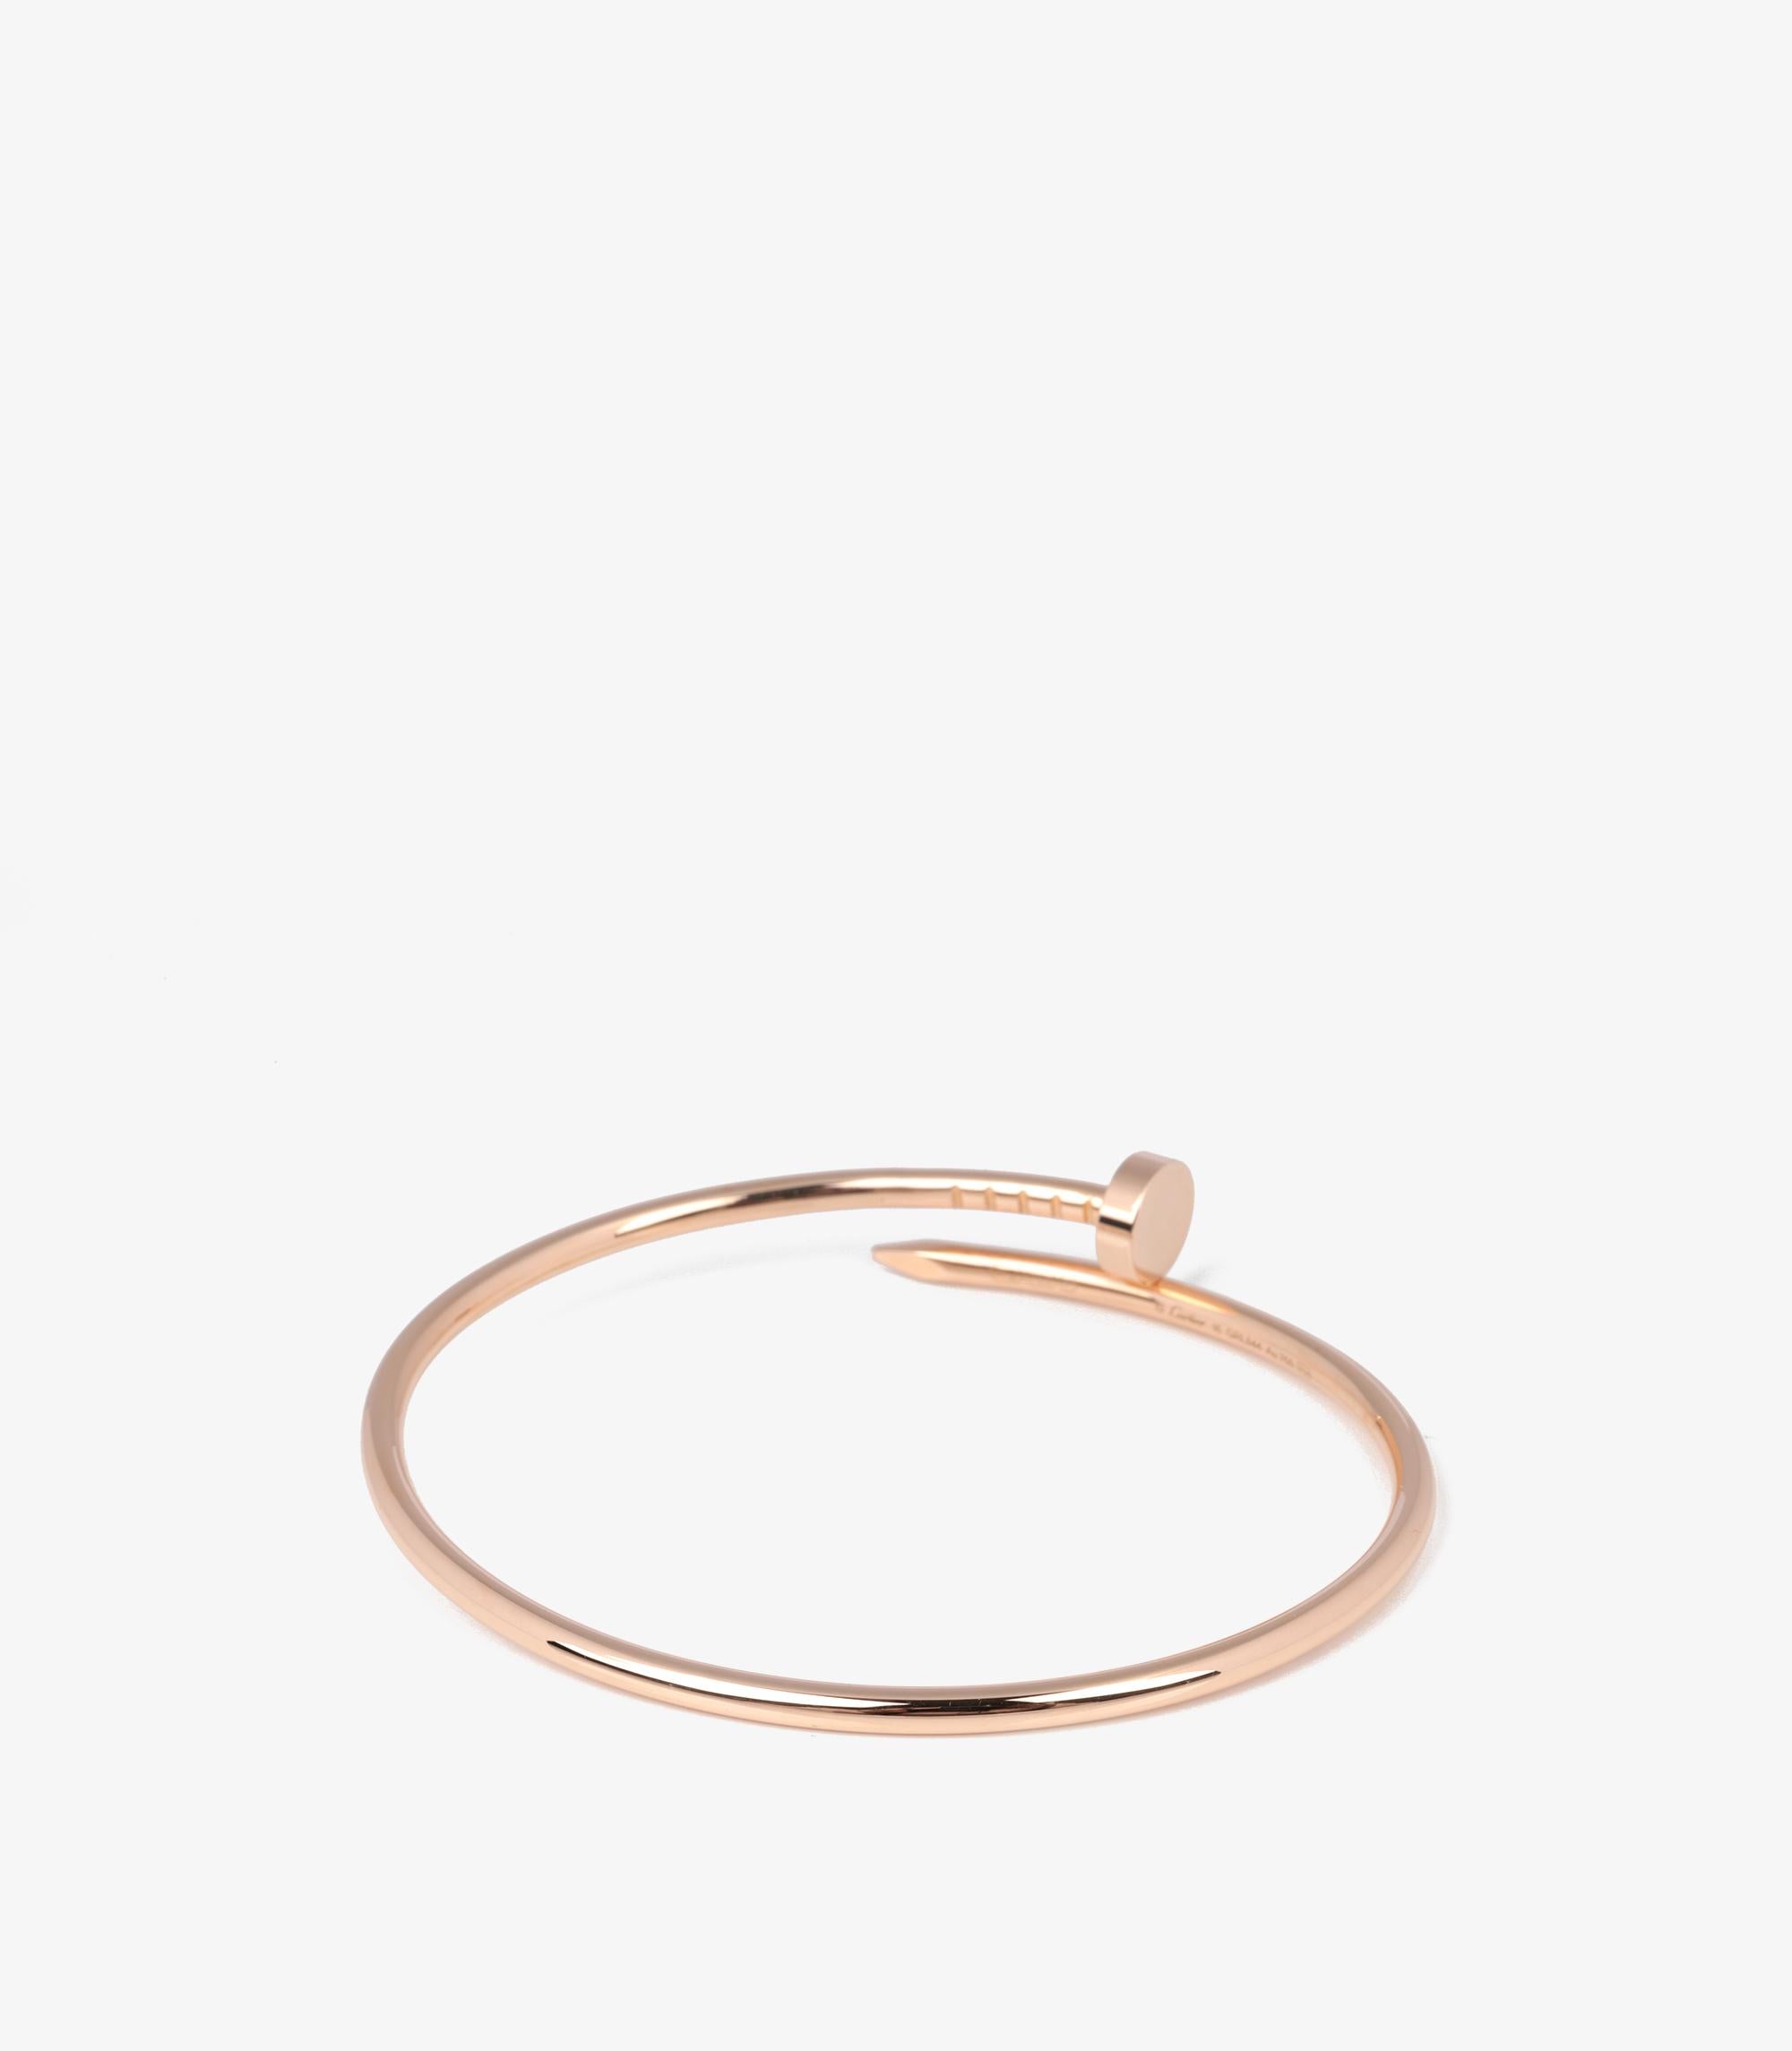 Brand Cartier 
Model Juste un Clou SM Bangle
Product Type Bracelet
Serial Number GRL844
Accompanied By
Cartier Pouch, Service Papers
Material(s) 18ct Rose Gold
Bracelet Length 16cm
Bracelet Width 1.4mm
Total Weight 9.4g
Condition Rating